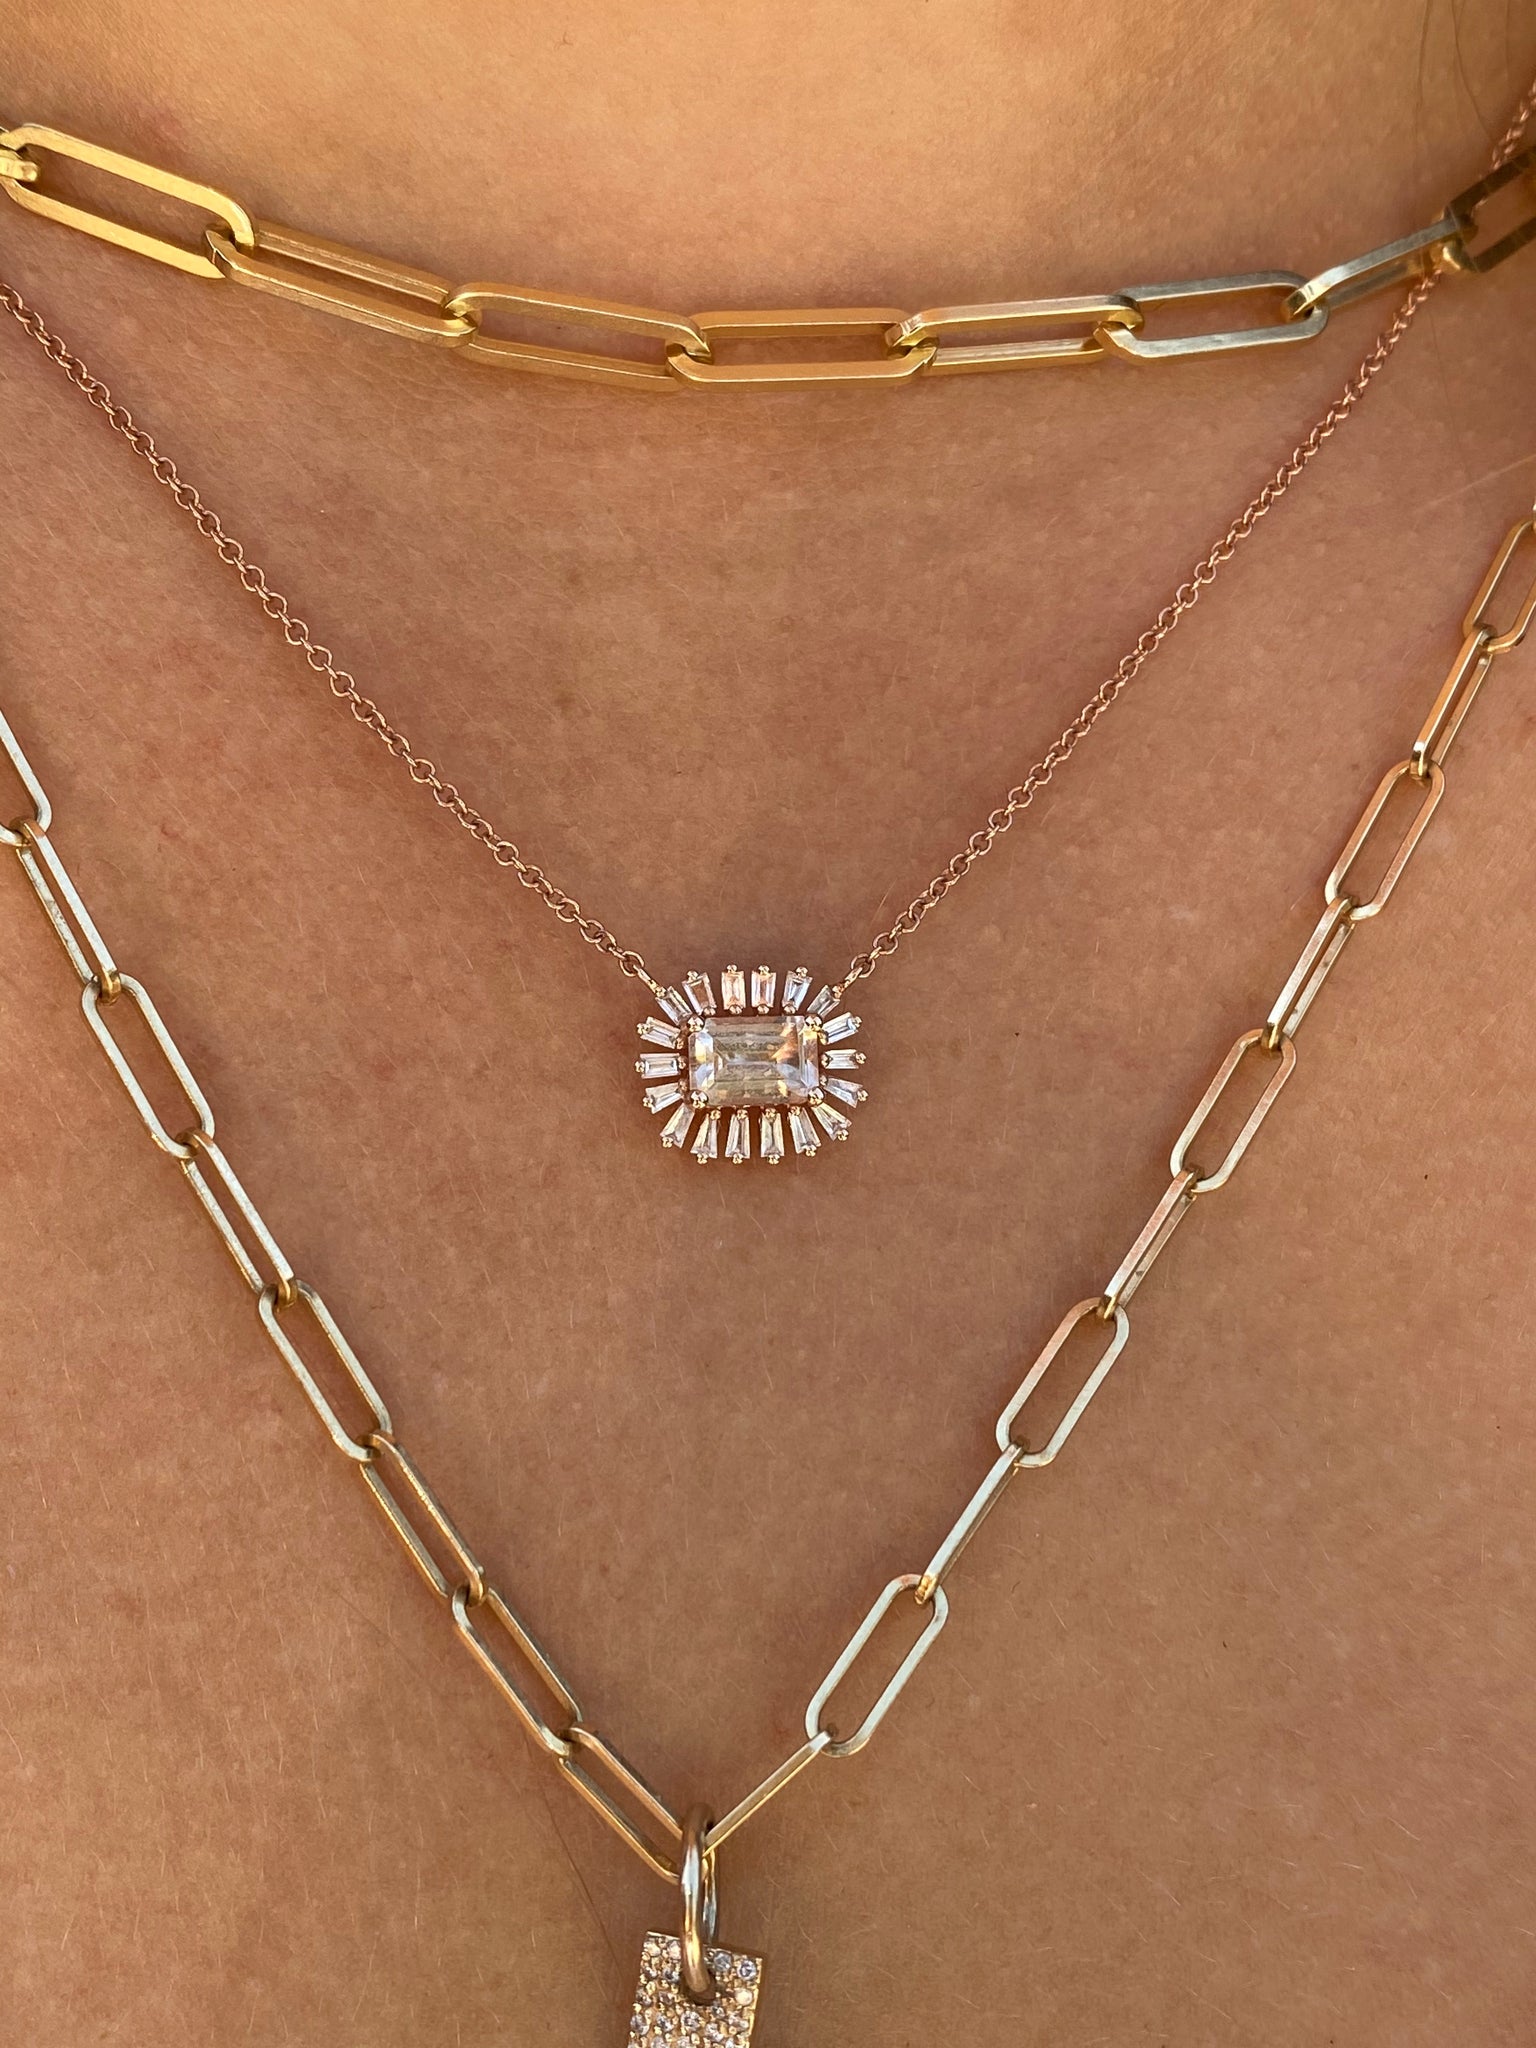 BAGUETTE DIAMOND AND MORGANITE NECKLACE